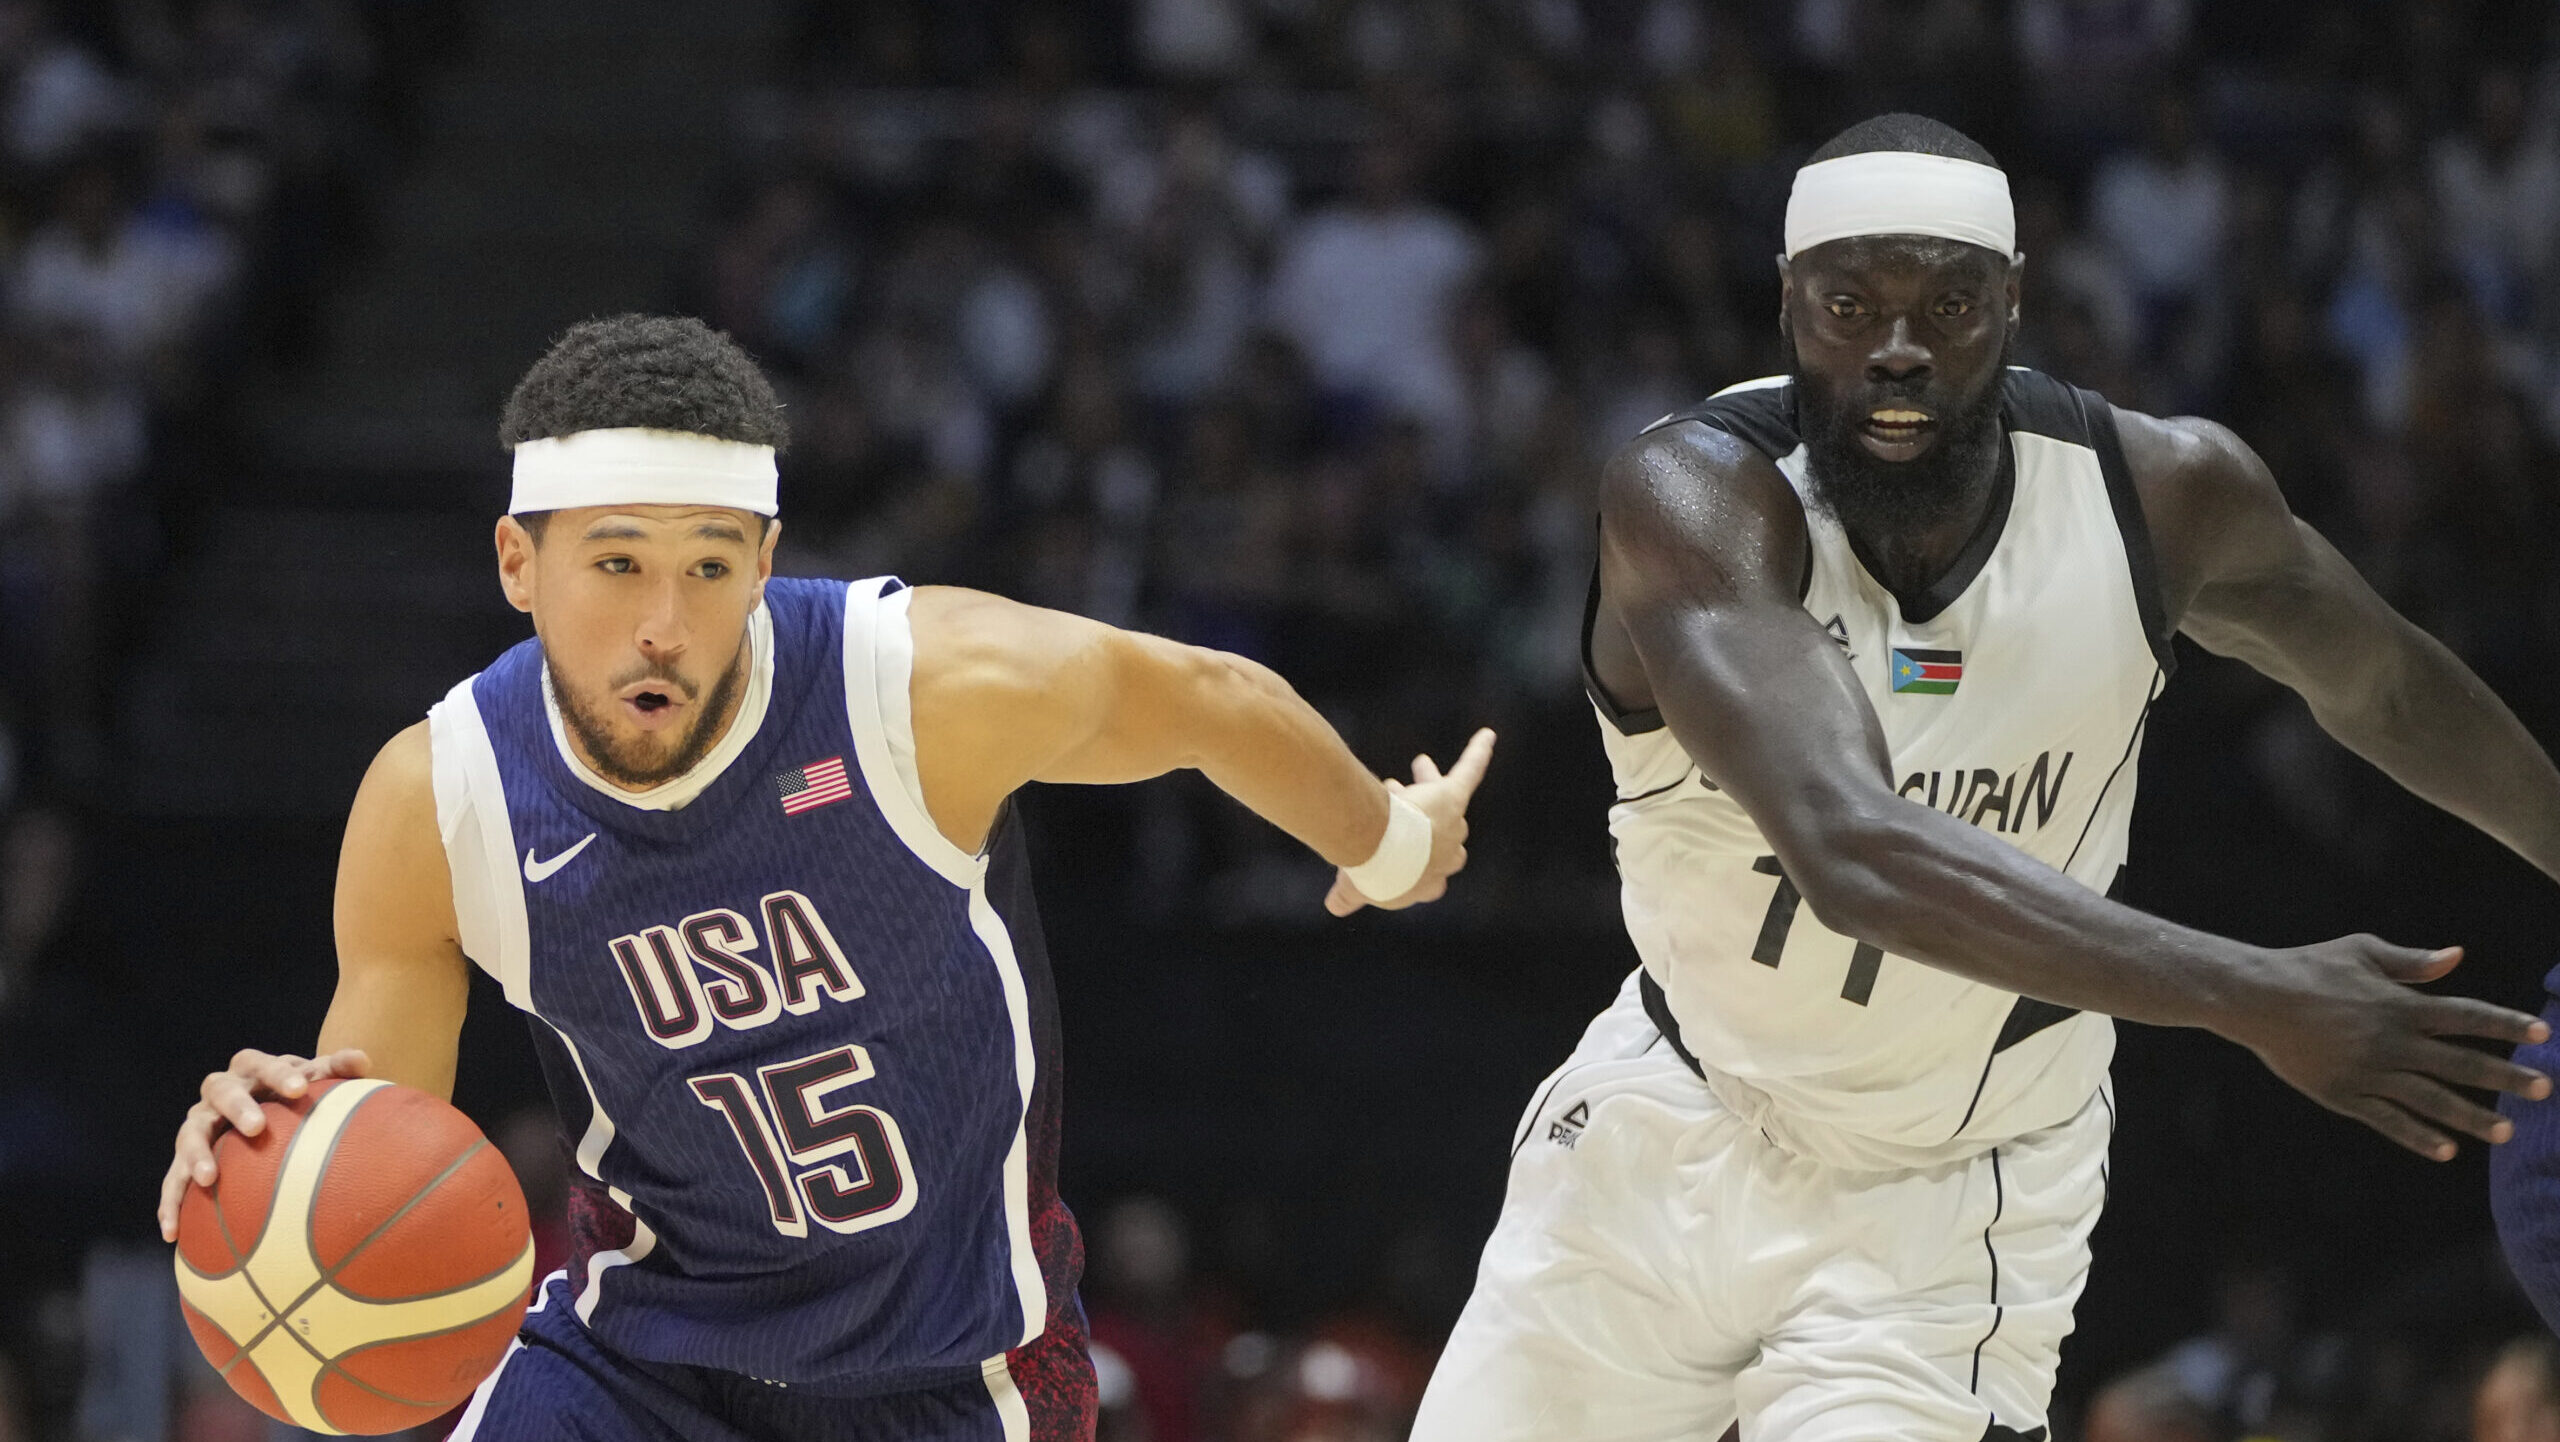 Devin Booker returns to starting lineup as Team USA avoids upset in close win over South Sudan